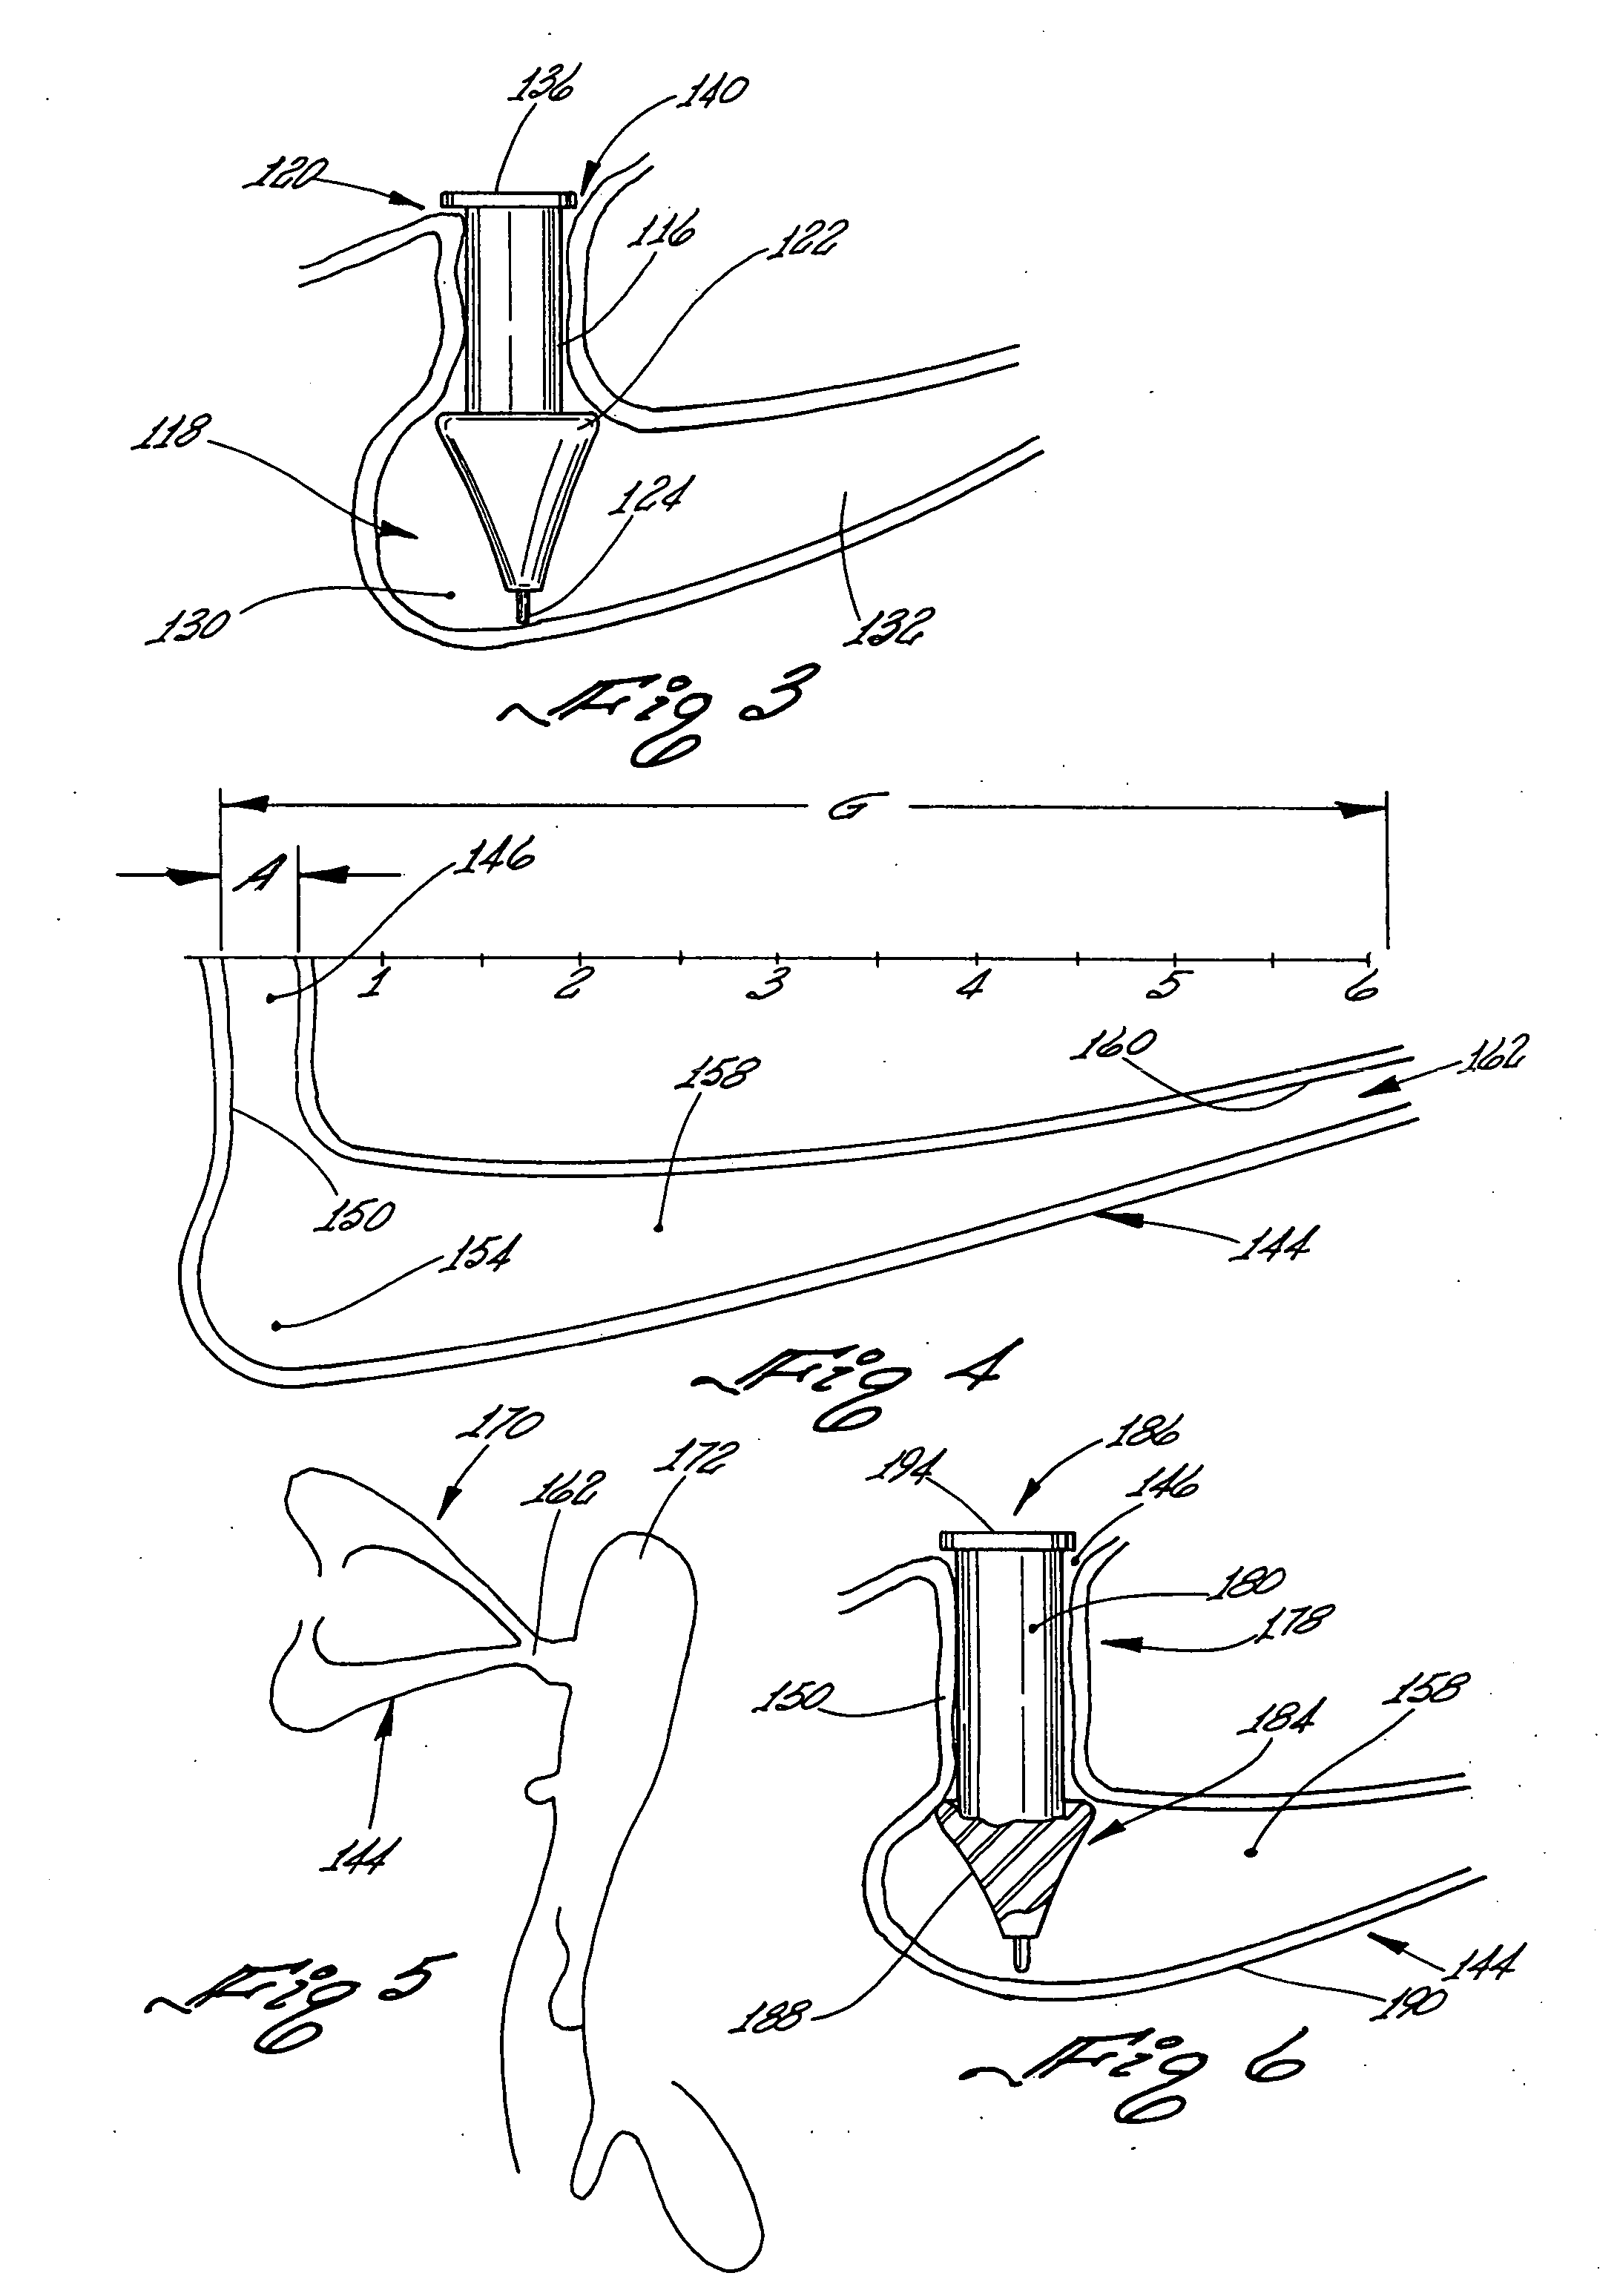 Implant capable of forming a differential image in an eye and methods of inserting and locating same